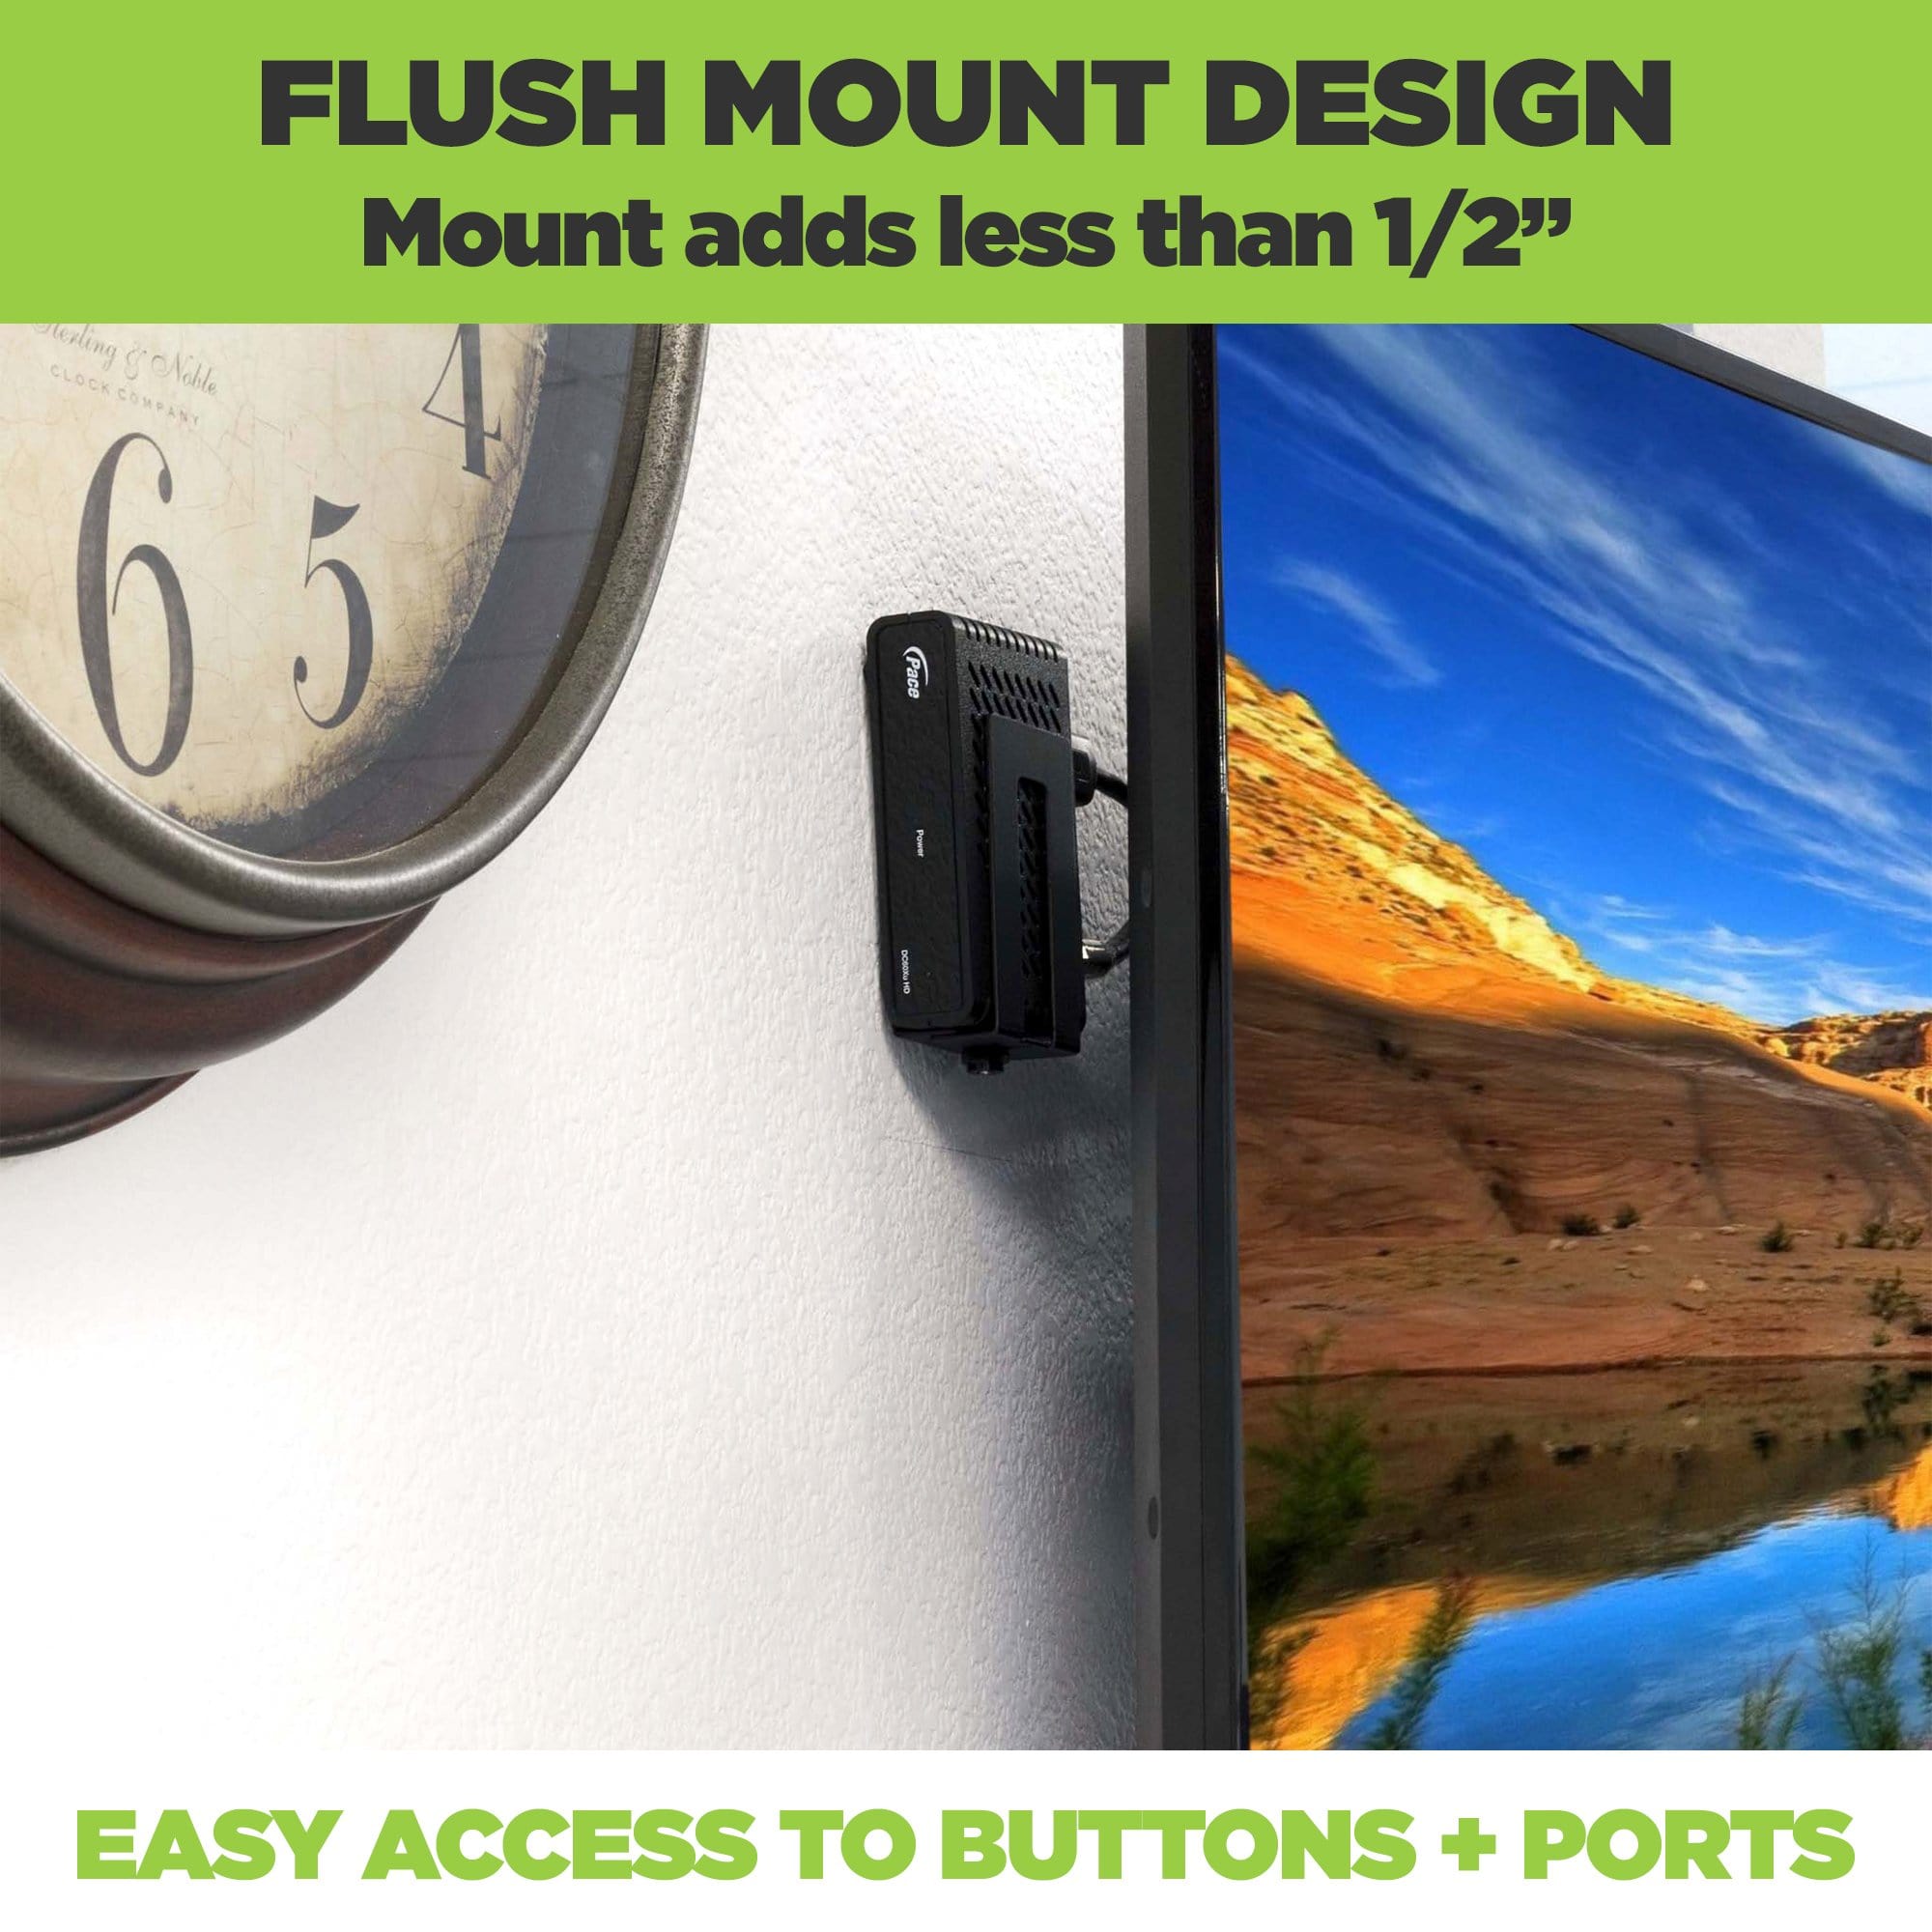 HIDEit wall mount designed for extra small electronic devices; flush wall installation.